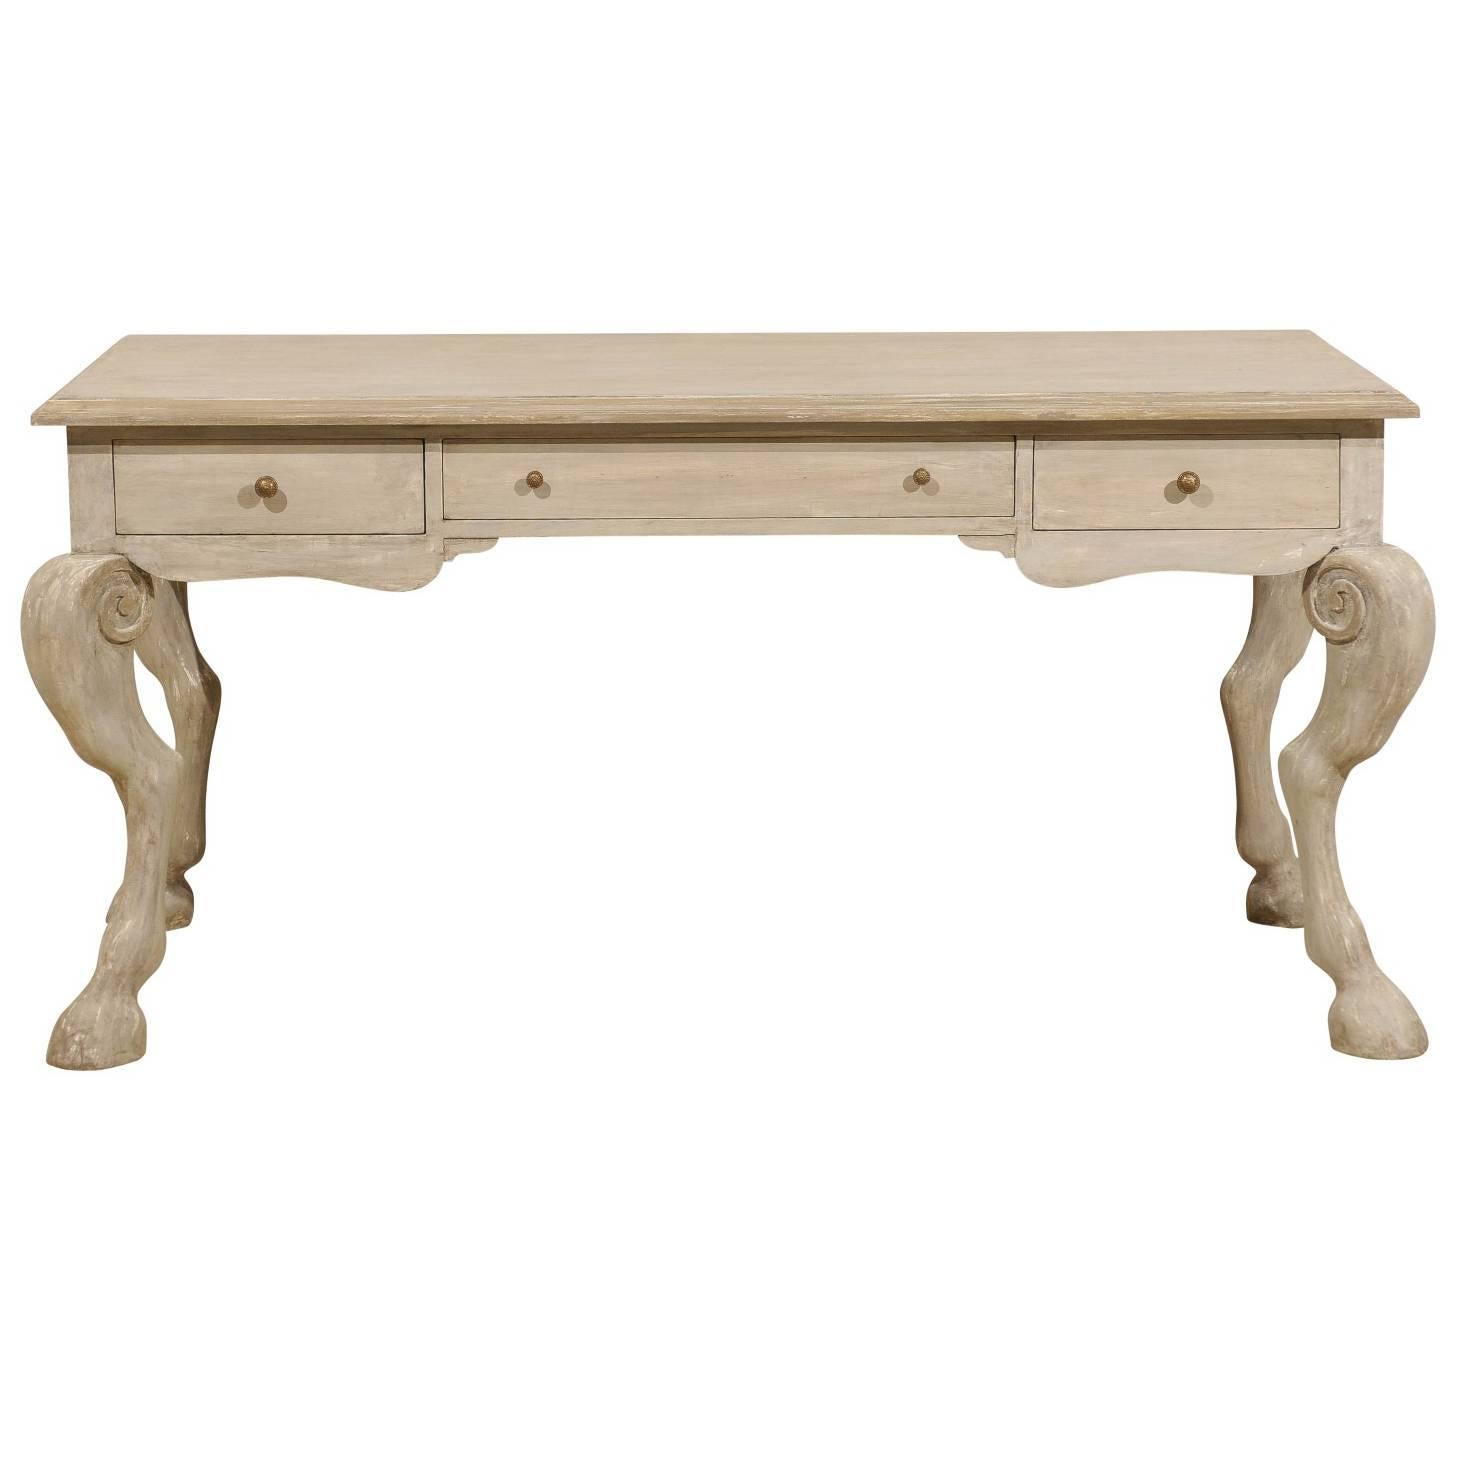 Unique Painted Wood Desk with Animal Legs and Hooved Feet of Grey-Green Color